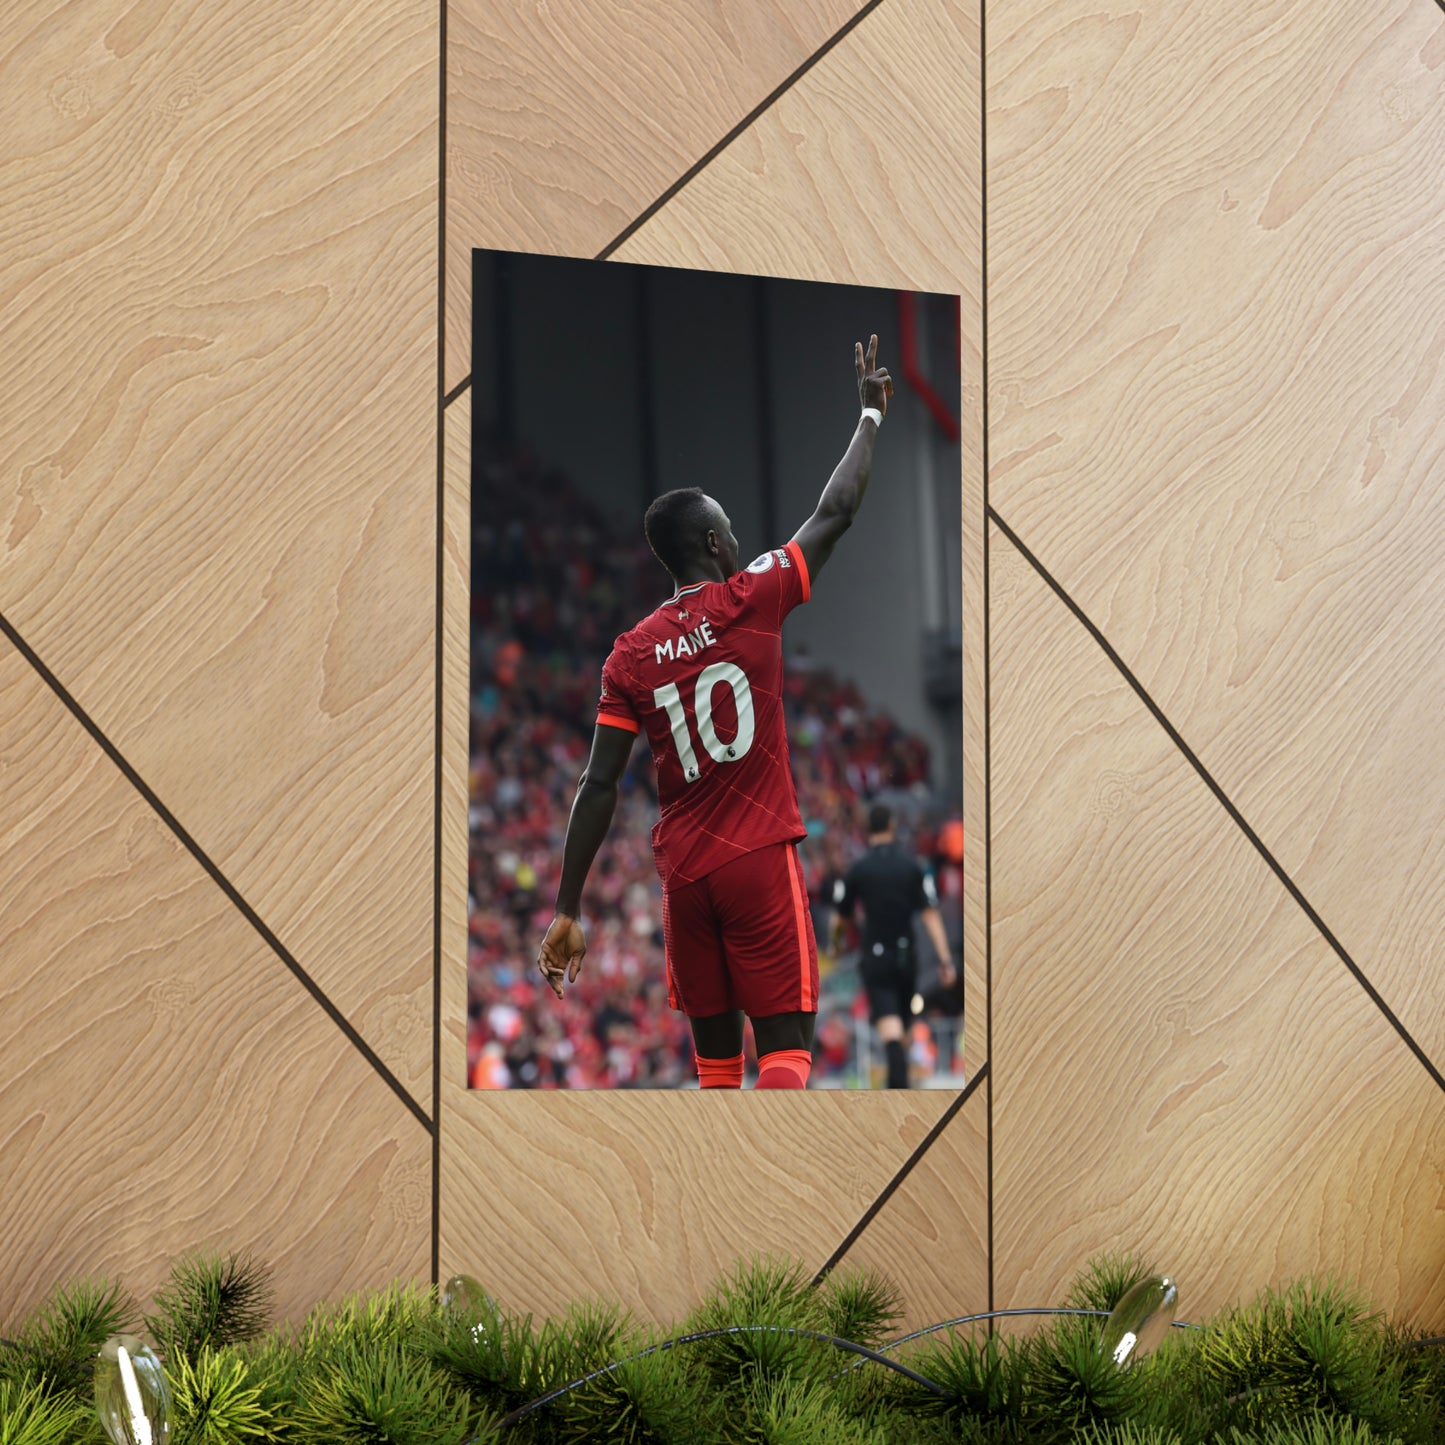 Sadio Mane Flashes Peace Sign In Liverpool Jersey Poster